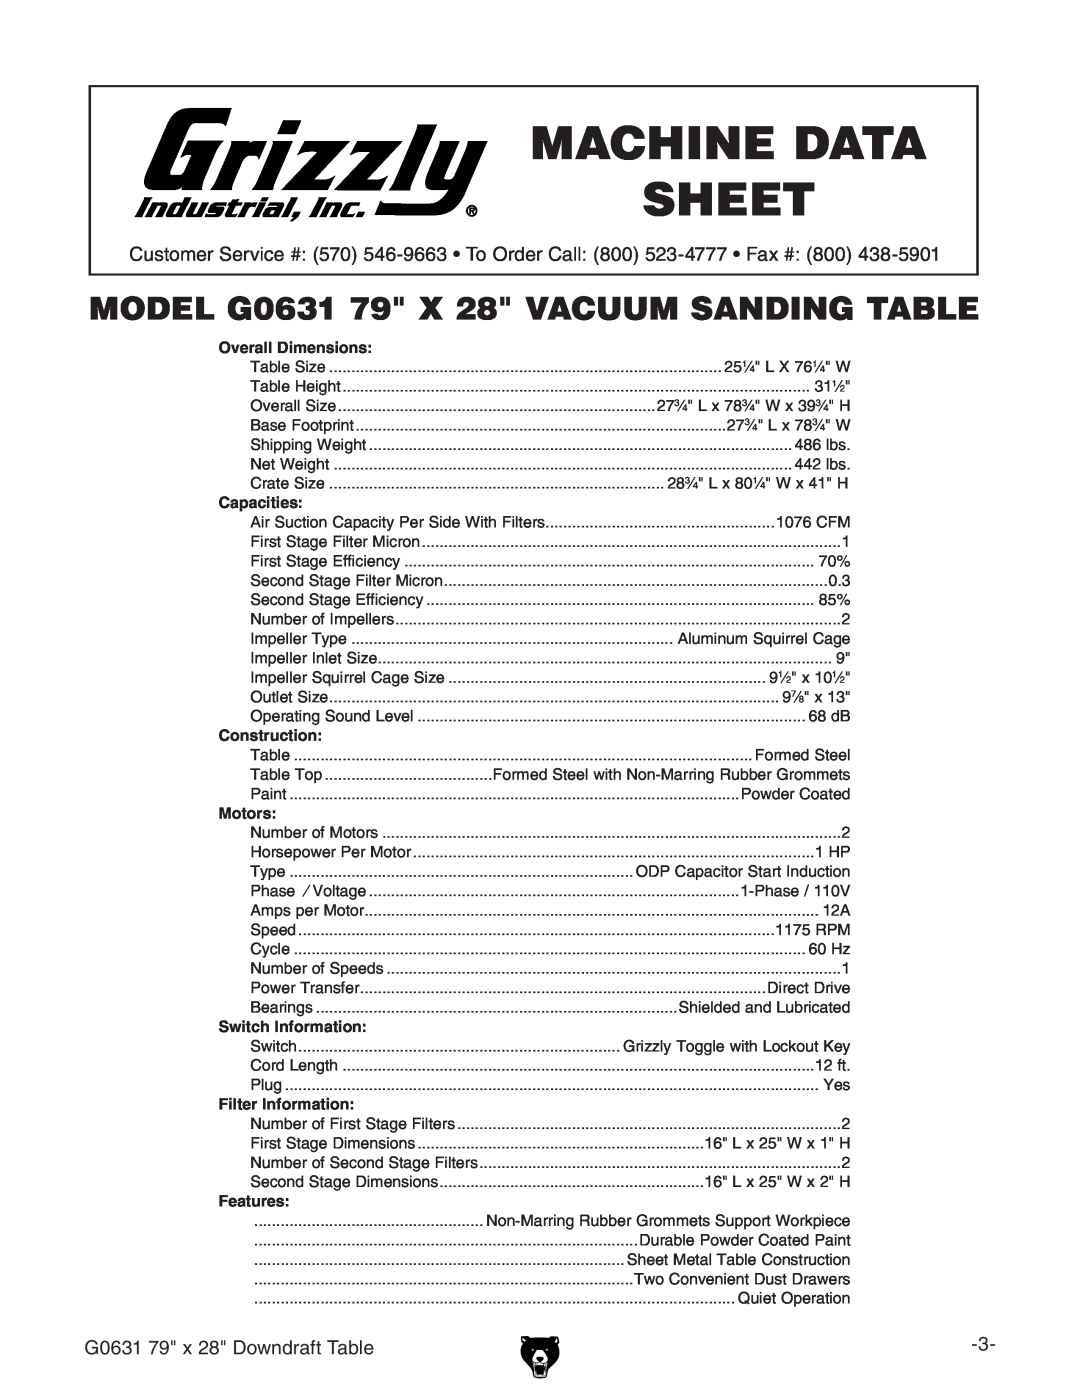 Grizzly owner manual Machine Data Set, G0631 79 x 28 Downdraft Table 